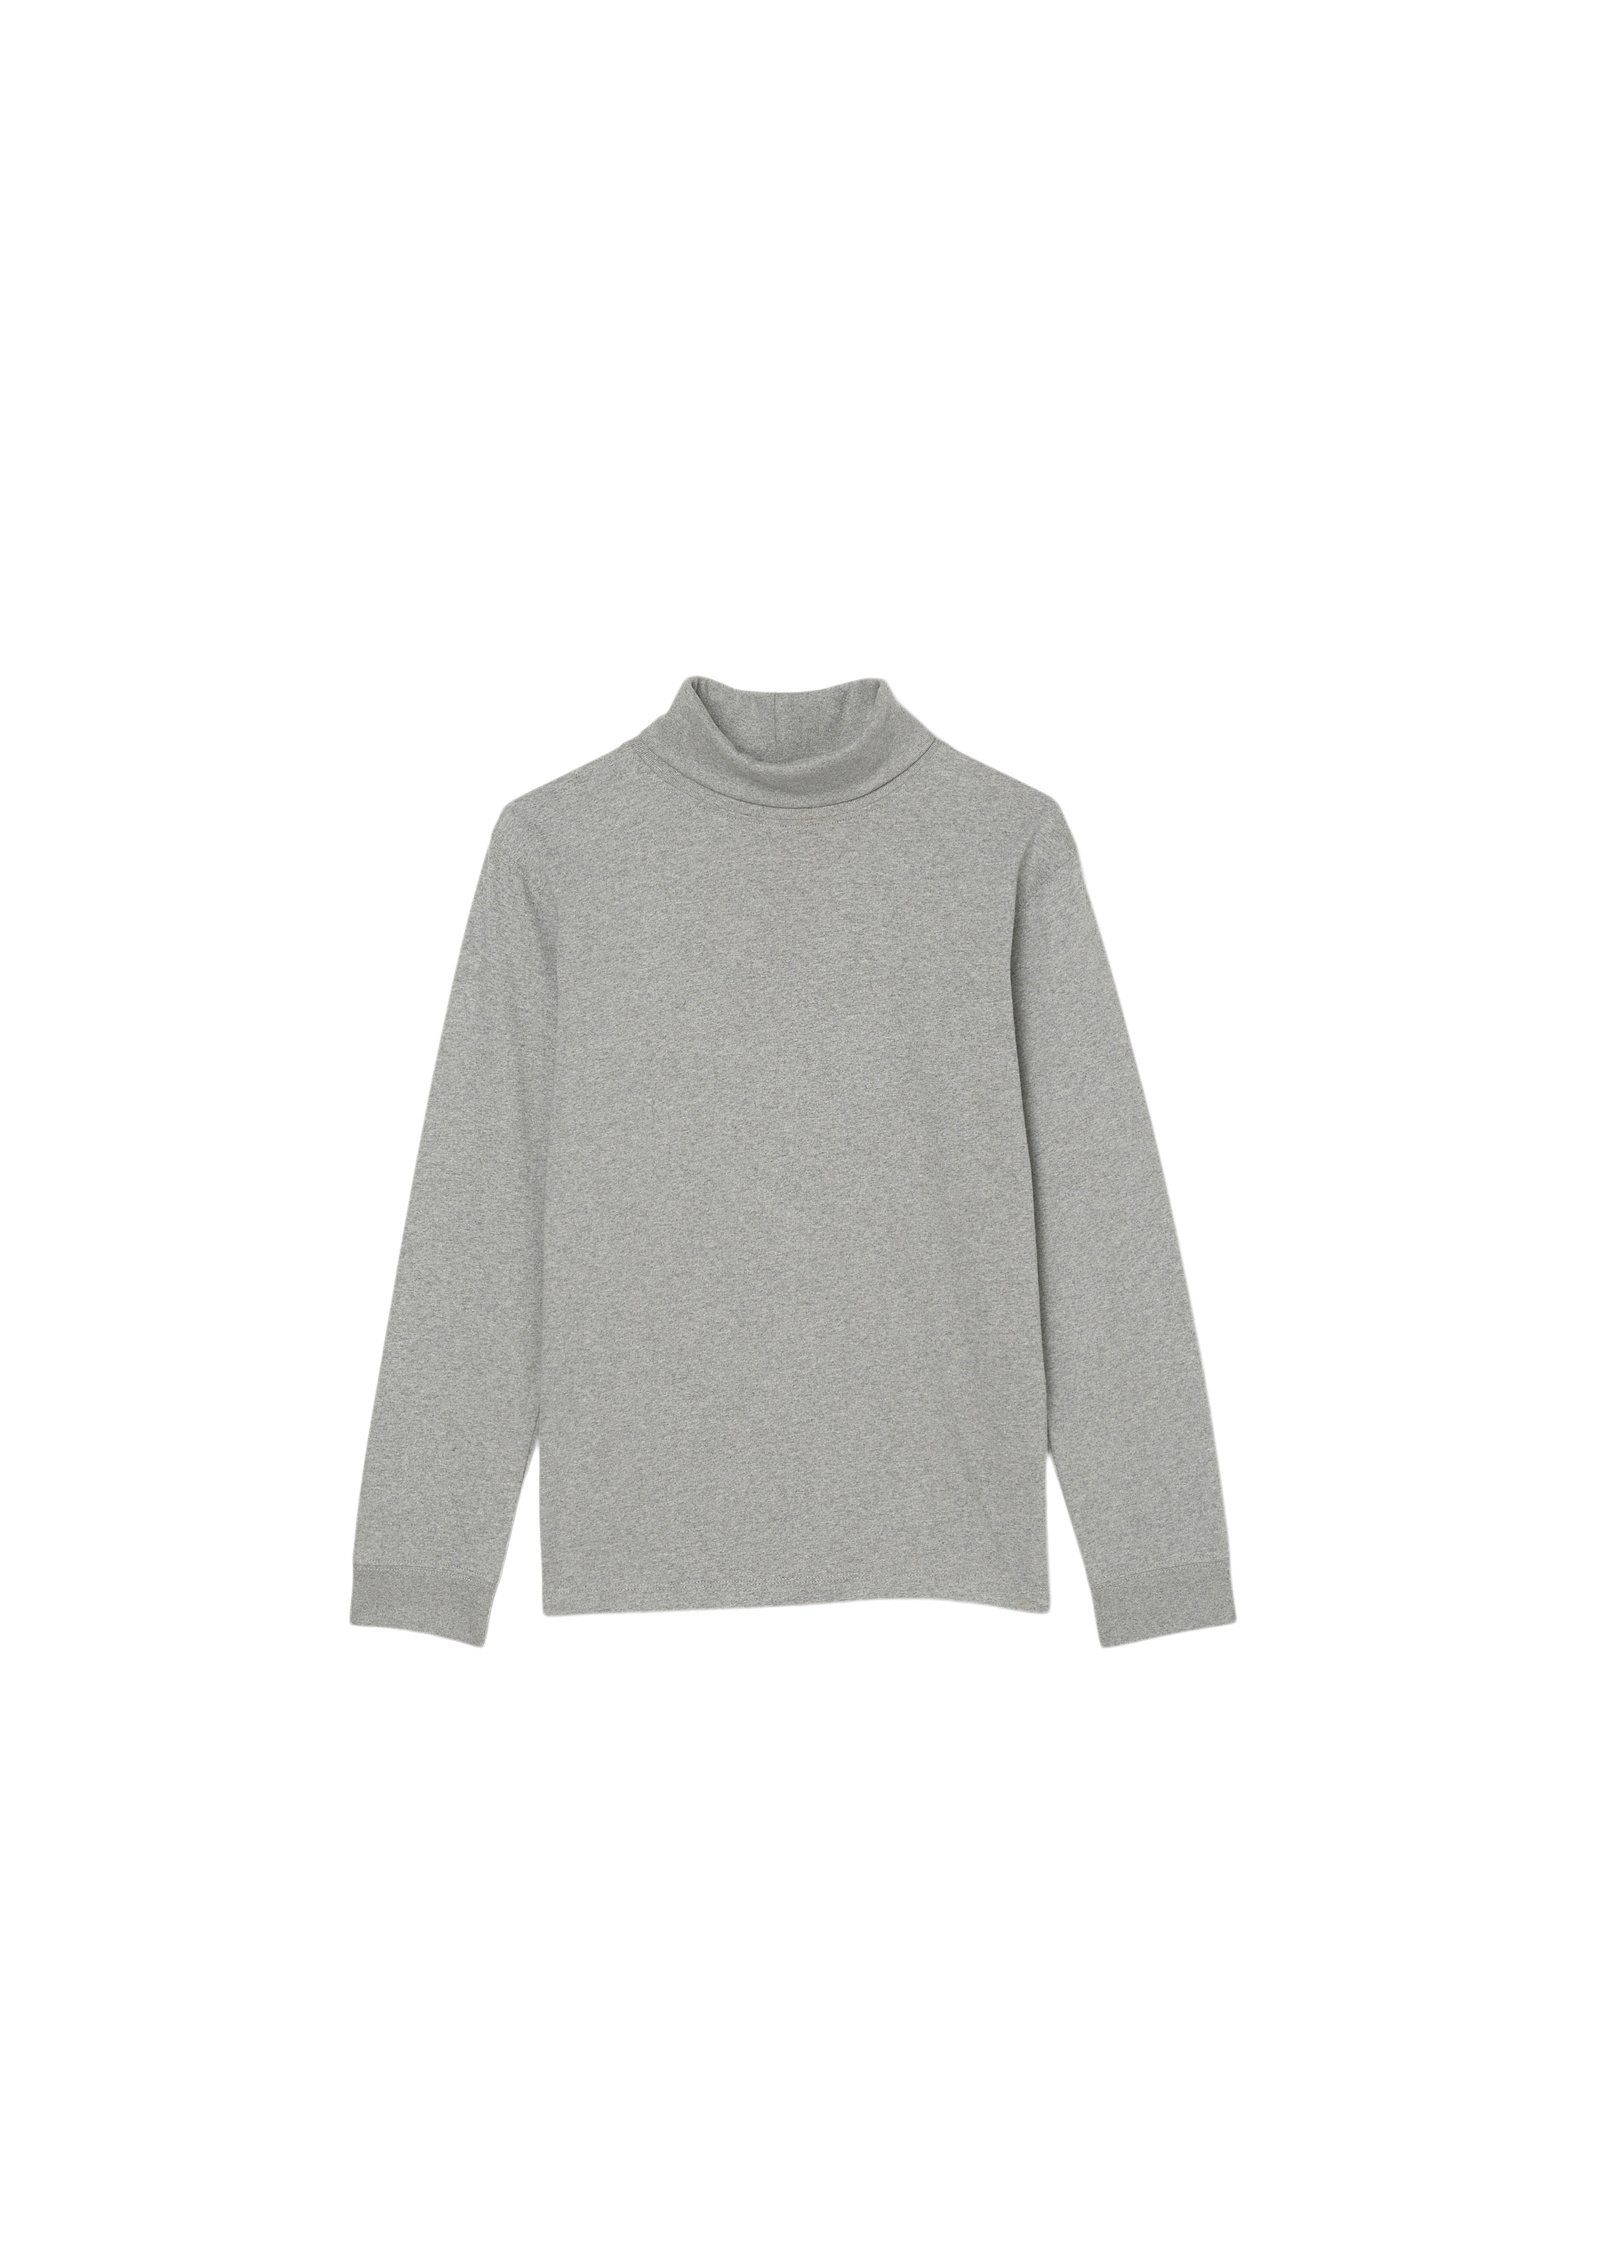 Marc O'Polo Strickpullover in grau Jersey-Qualität softer